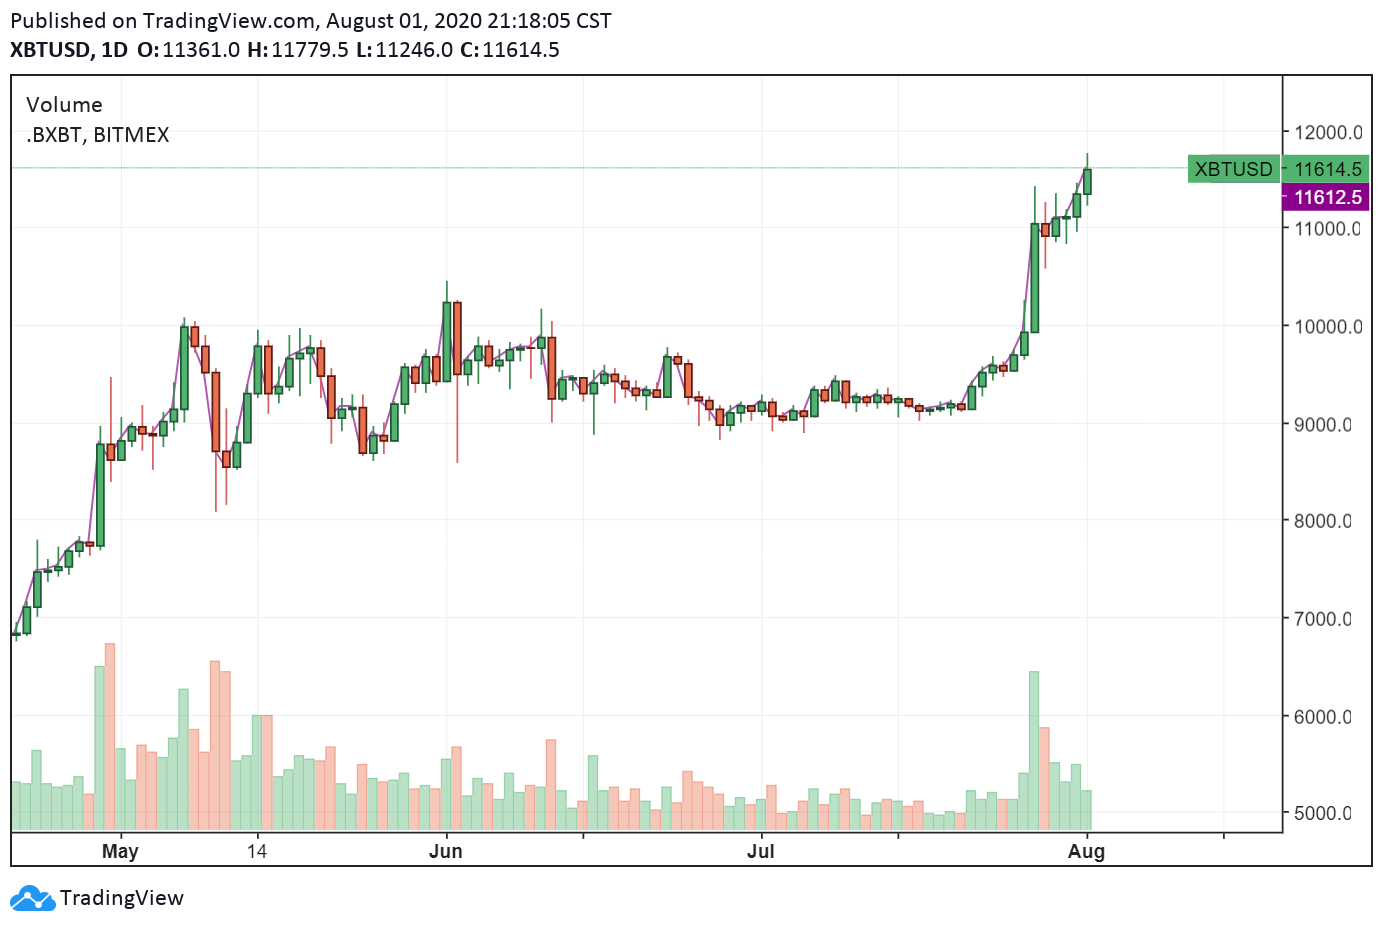 The price of Bitcoin surpasses $11,700 in a swift intraday rally